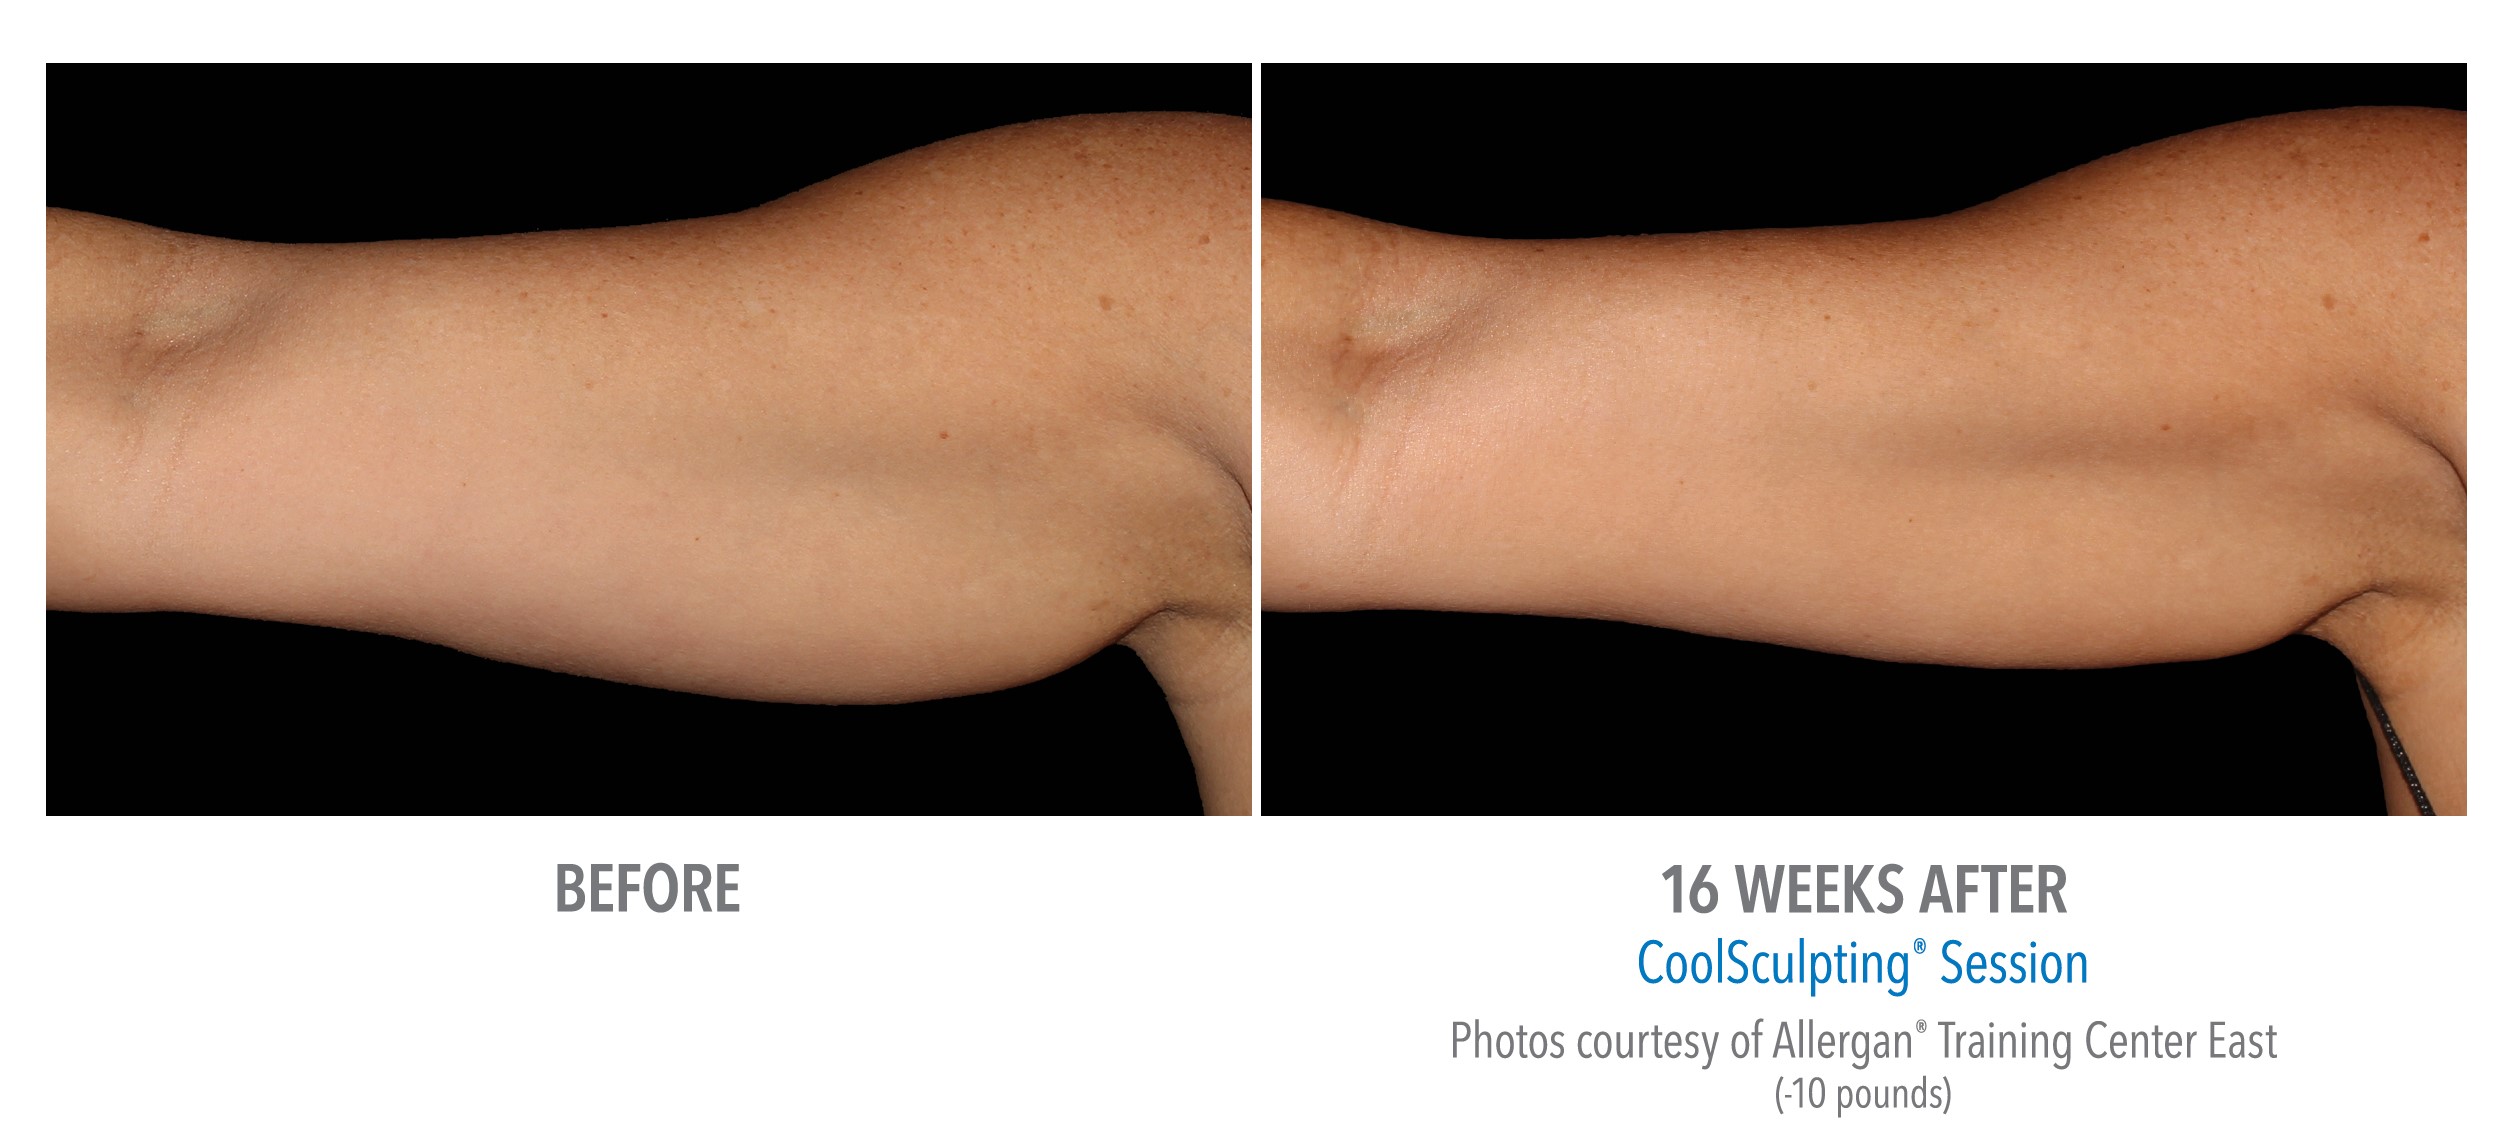 https://www.michelegreenmd.com/wp-content/uploads/coolsculpting-arms-16-weeks.jpg